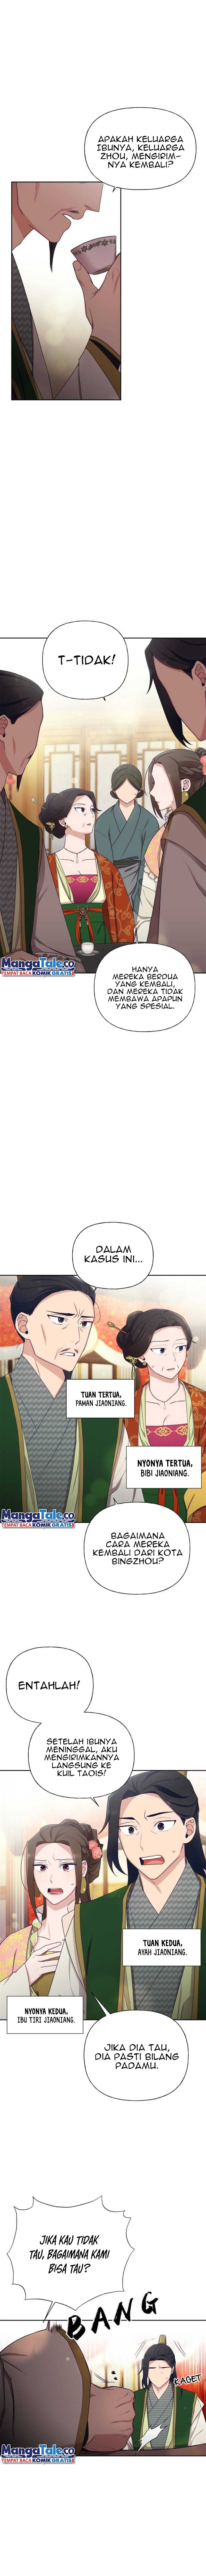 The Marvelous Dr. Jiaoniang Chapter 06